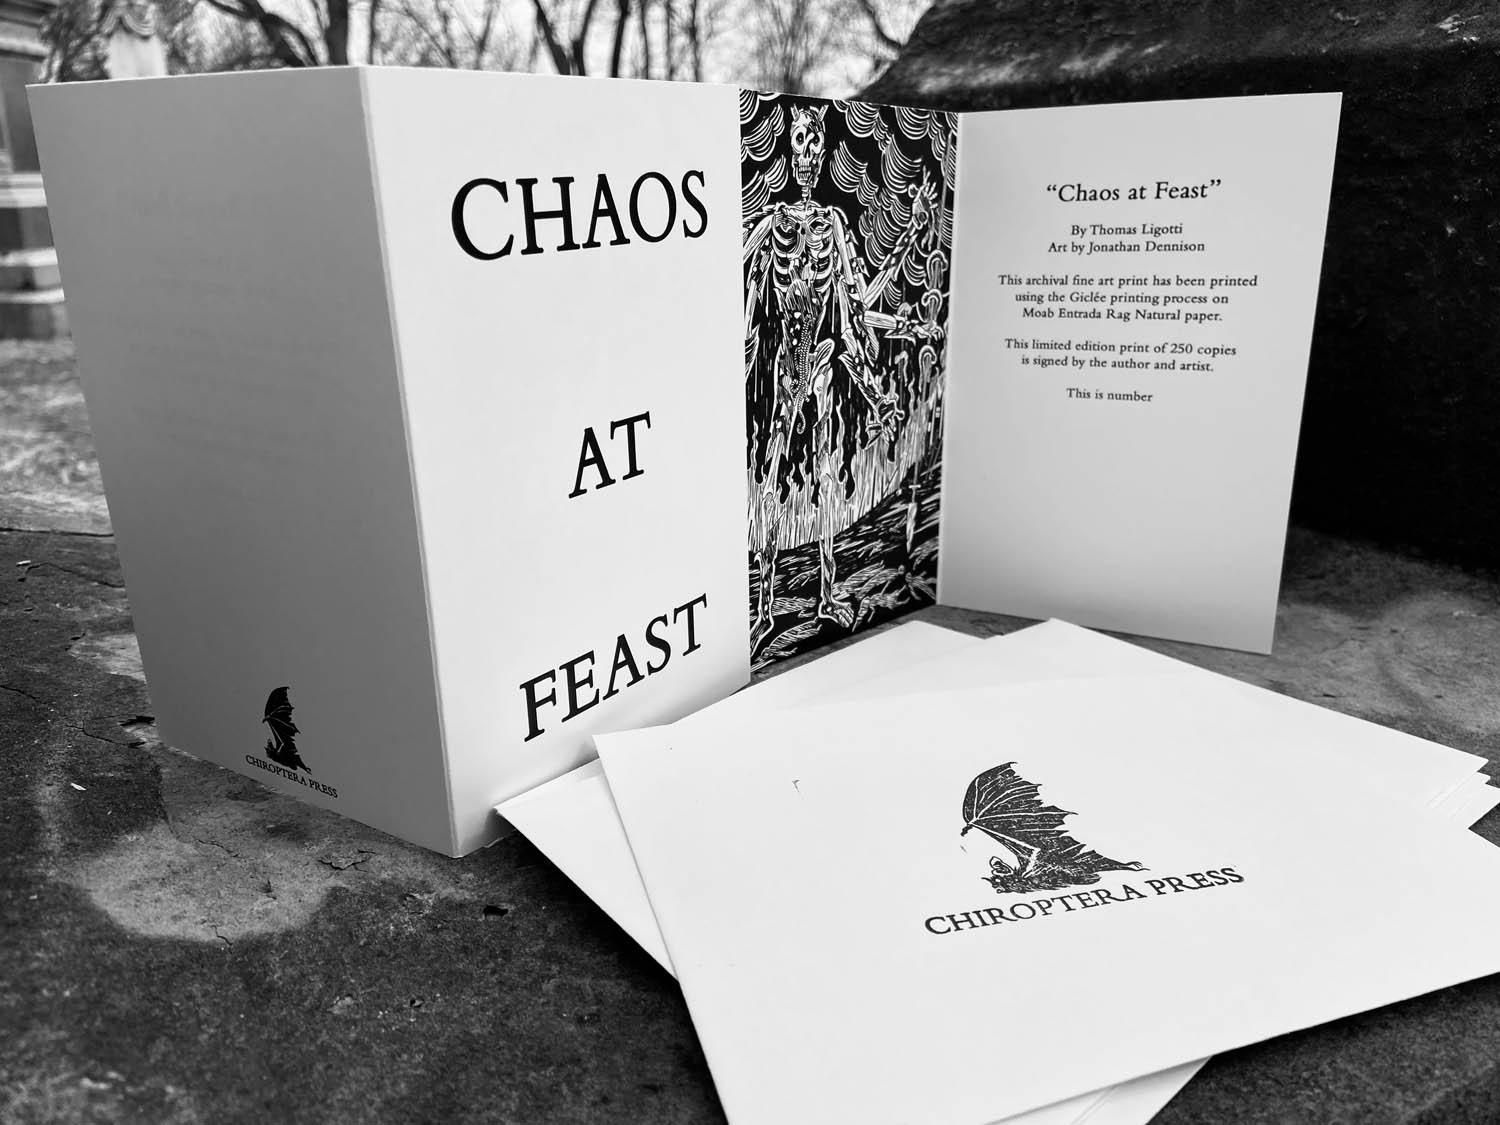 Chaos at Feast by Thomas Ligotti Signed Print